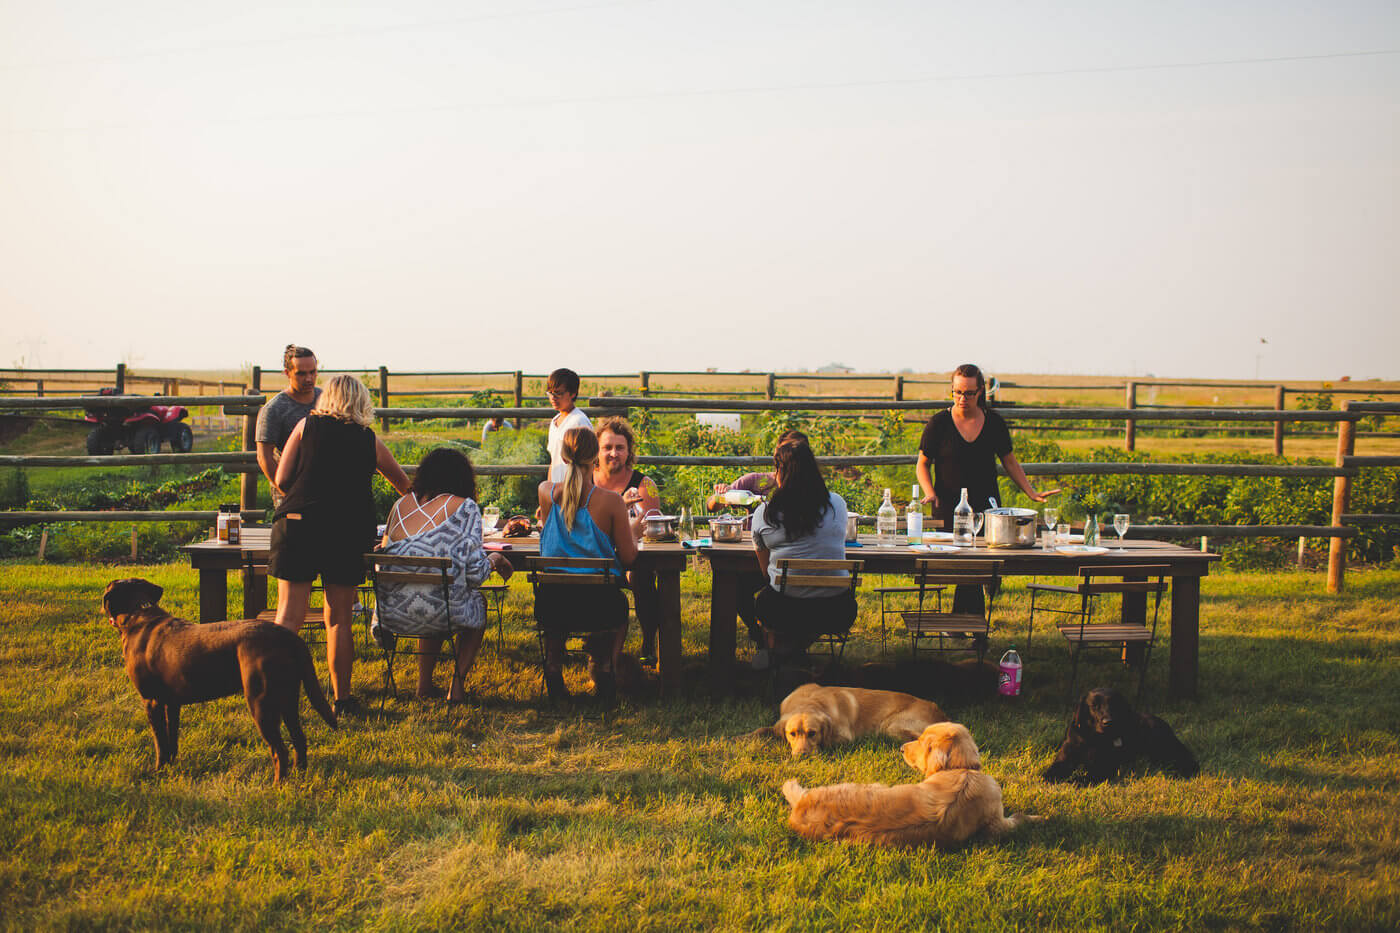 A gathering of people and dogs sitting around a table in a field, enjoying their meal together.